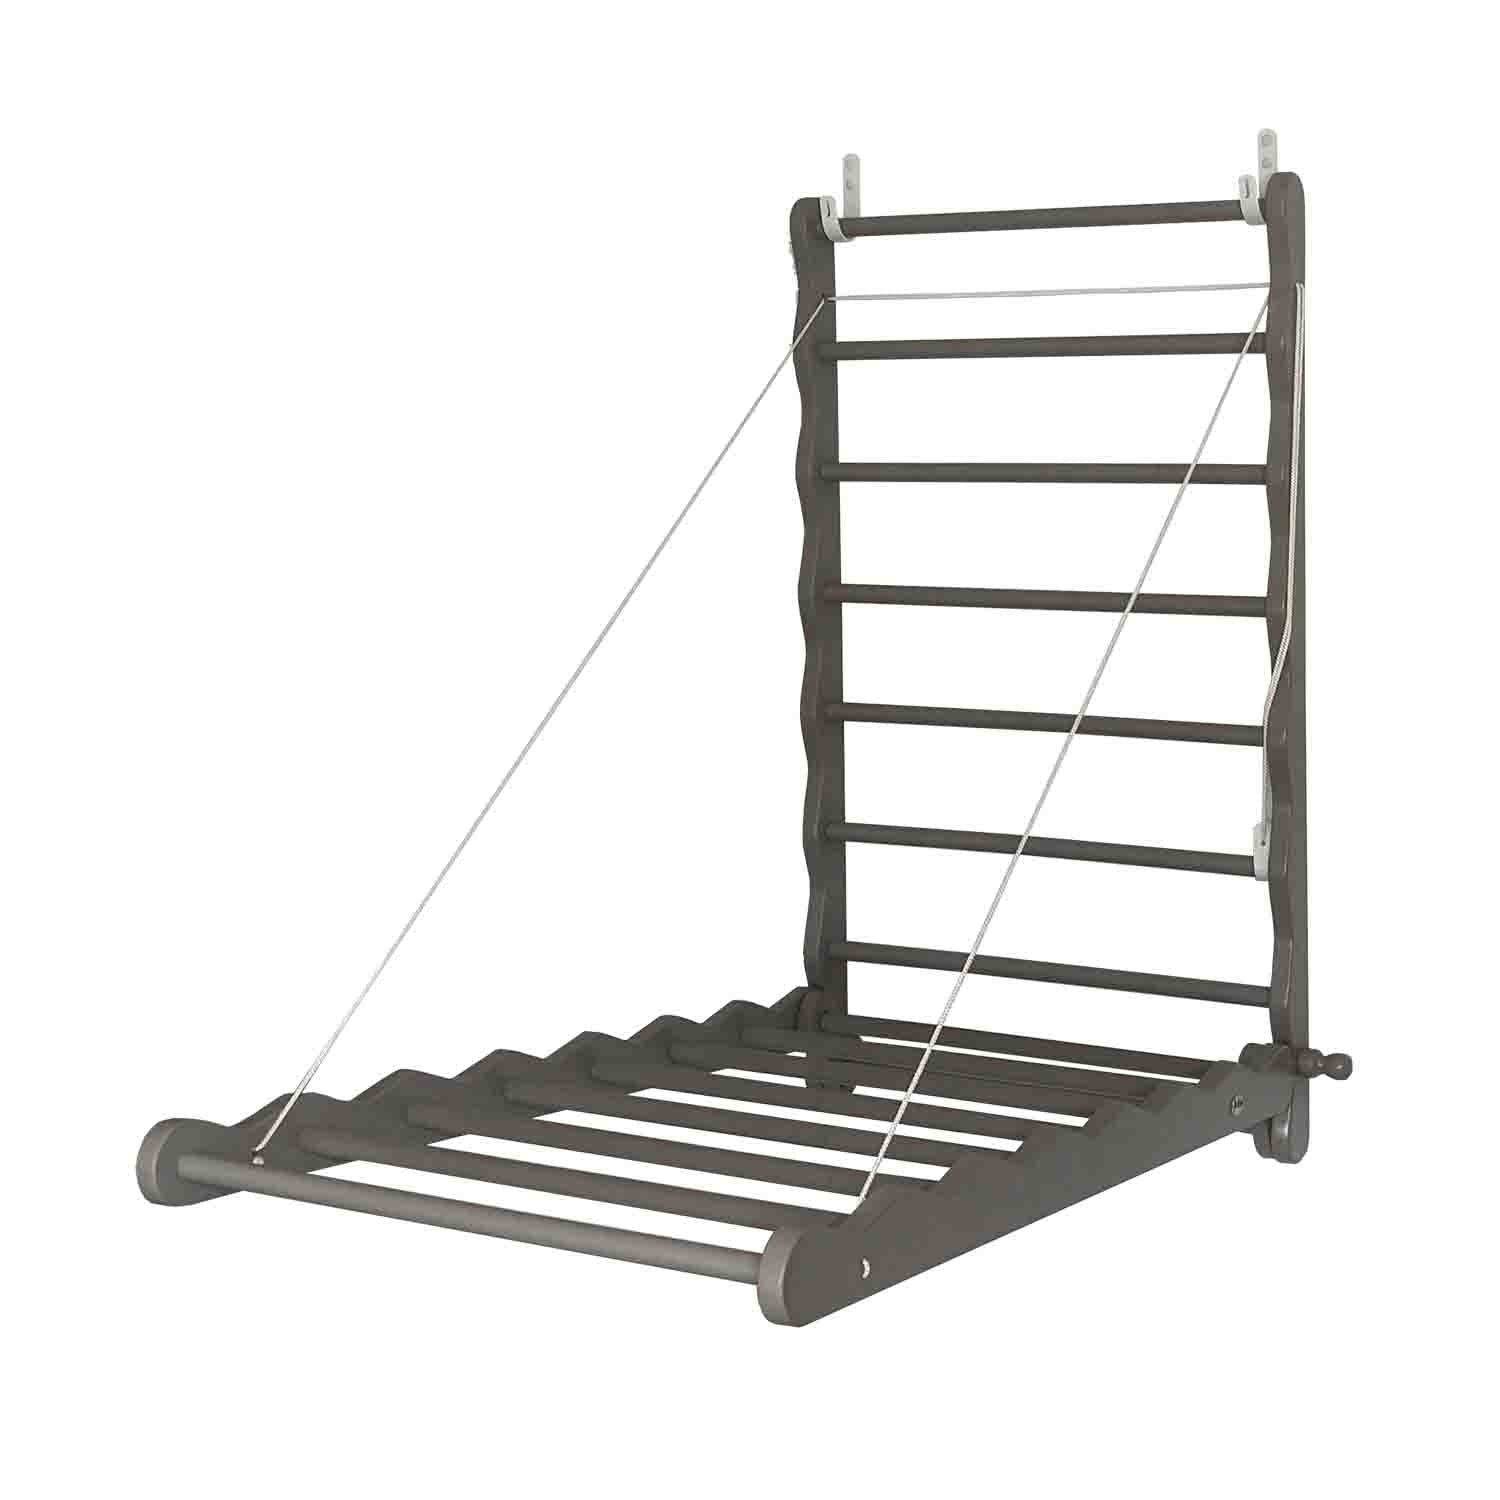 Bunty Slim Wall Mounted Clothes Airer